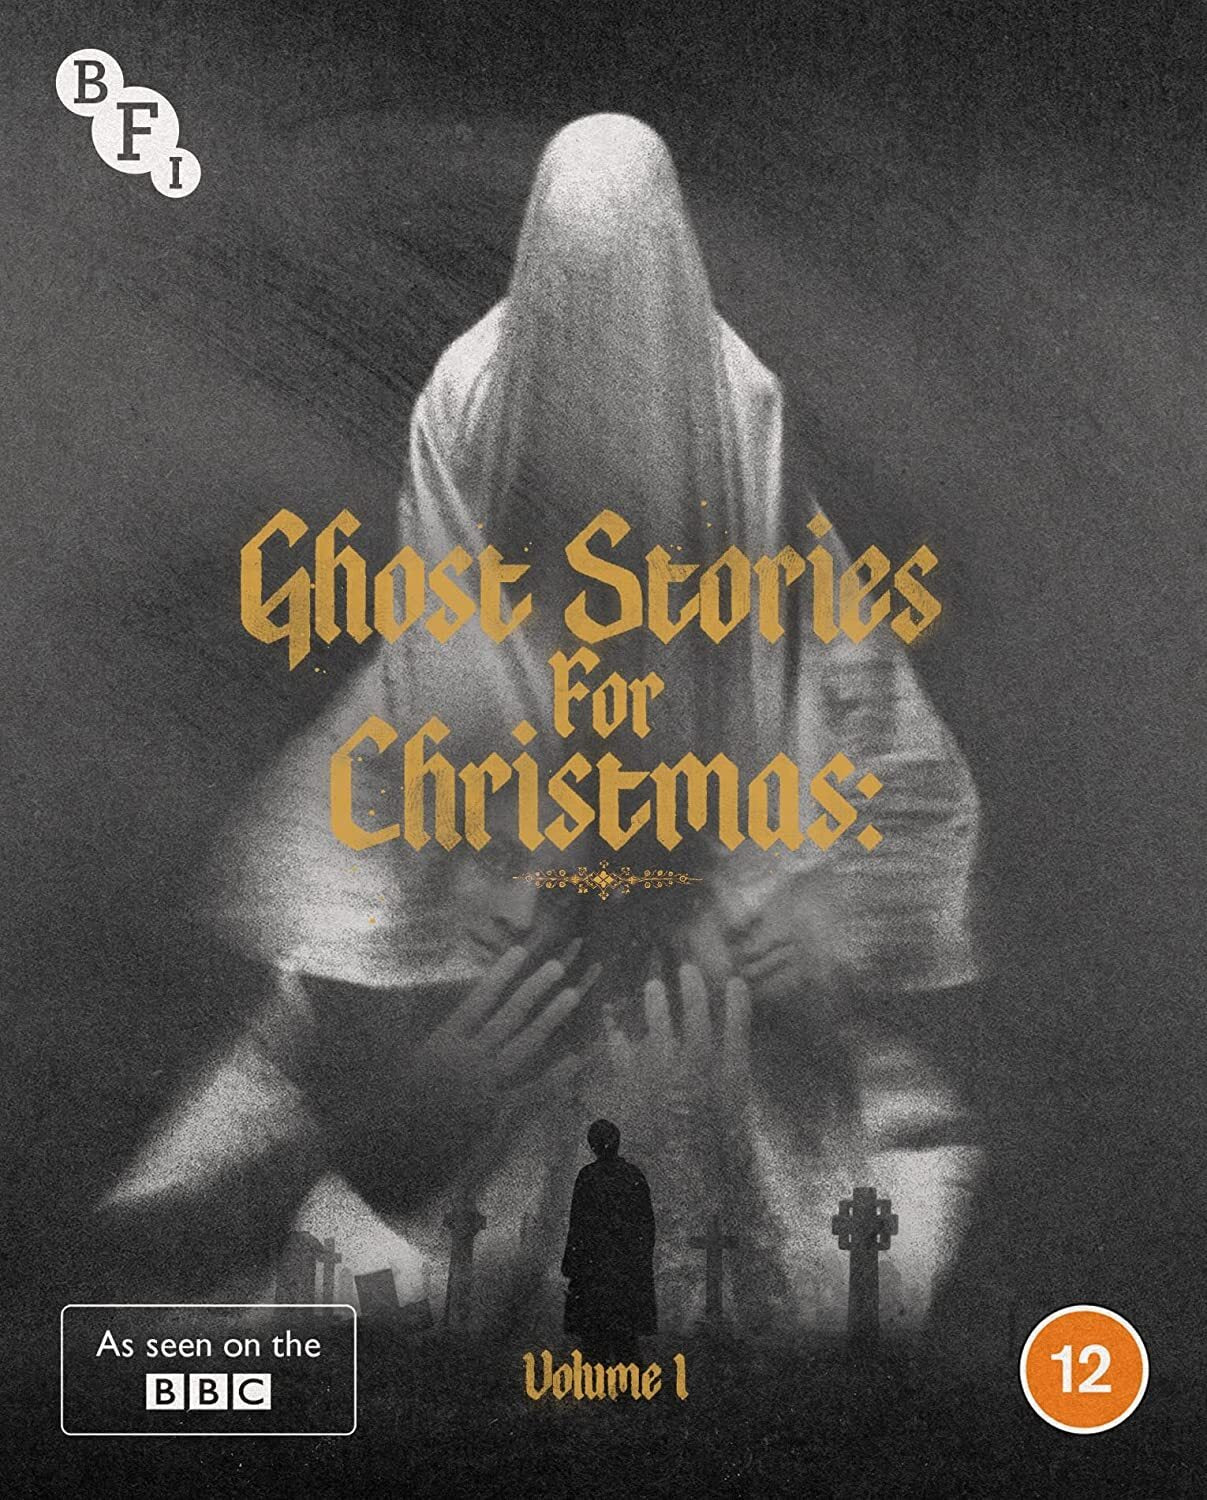 GHOST STORIES FOR CHRISTMAS VOLUME 1 (REGION B IMPORT) BLU-RAY